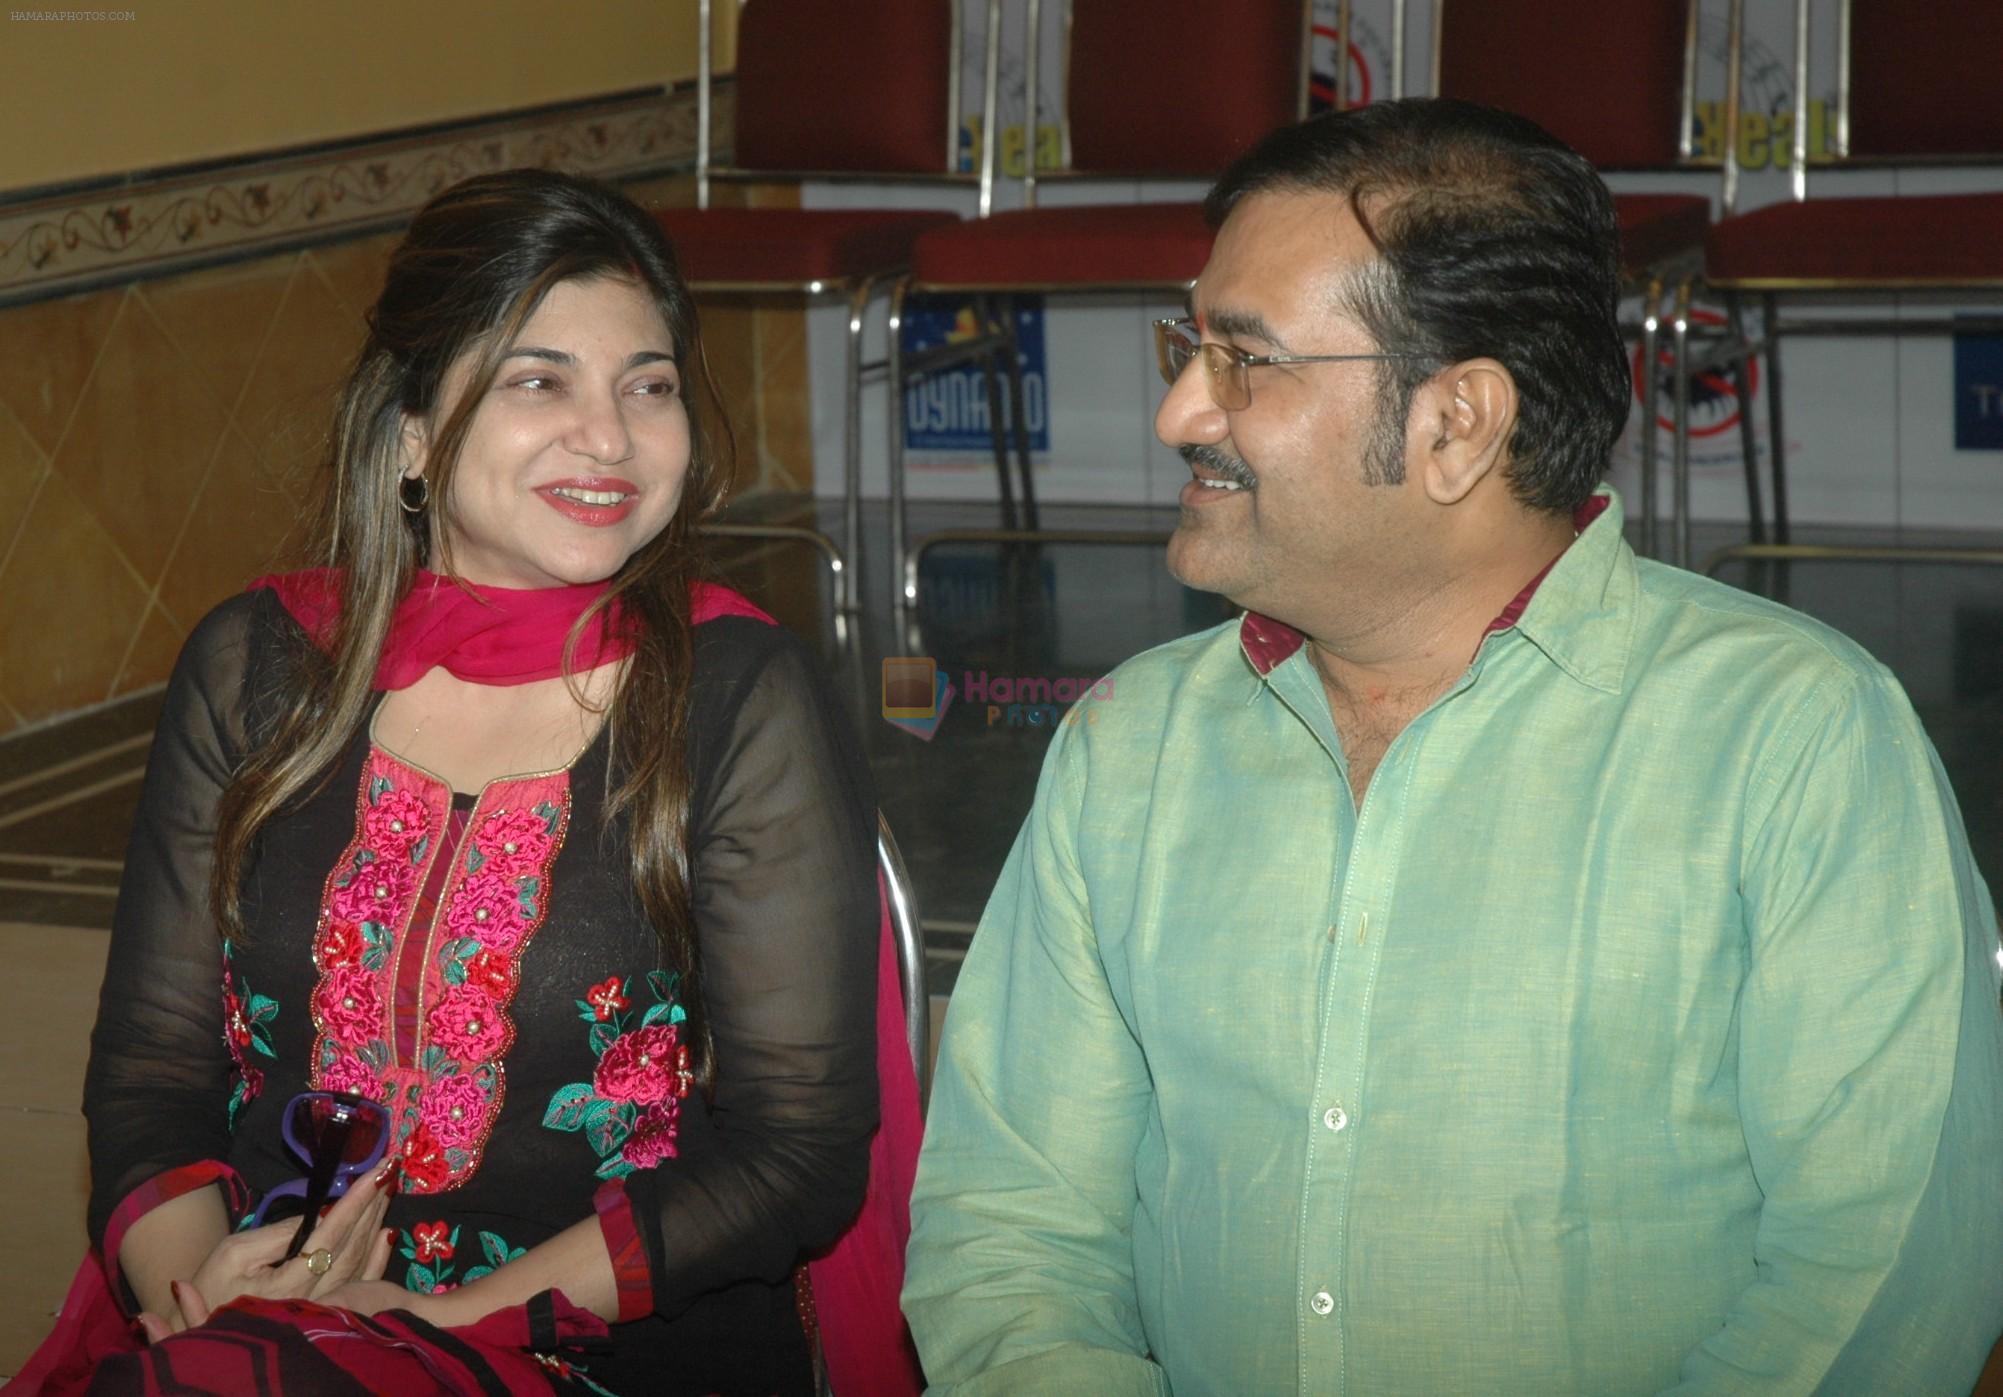 Sudesh Bhosle with Alka Yagnik at the rehearsals for the Cancer Aid & Research Foundation's Music Heals 2011 with 100 live musicians under the Music Batonship of Jayanti Gosher & Kishore Sharma on 9th Nov 2011